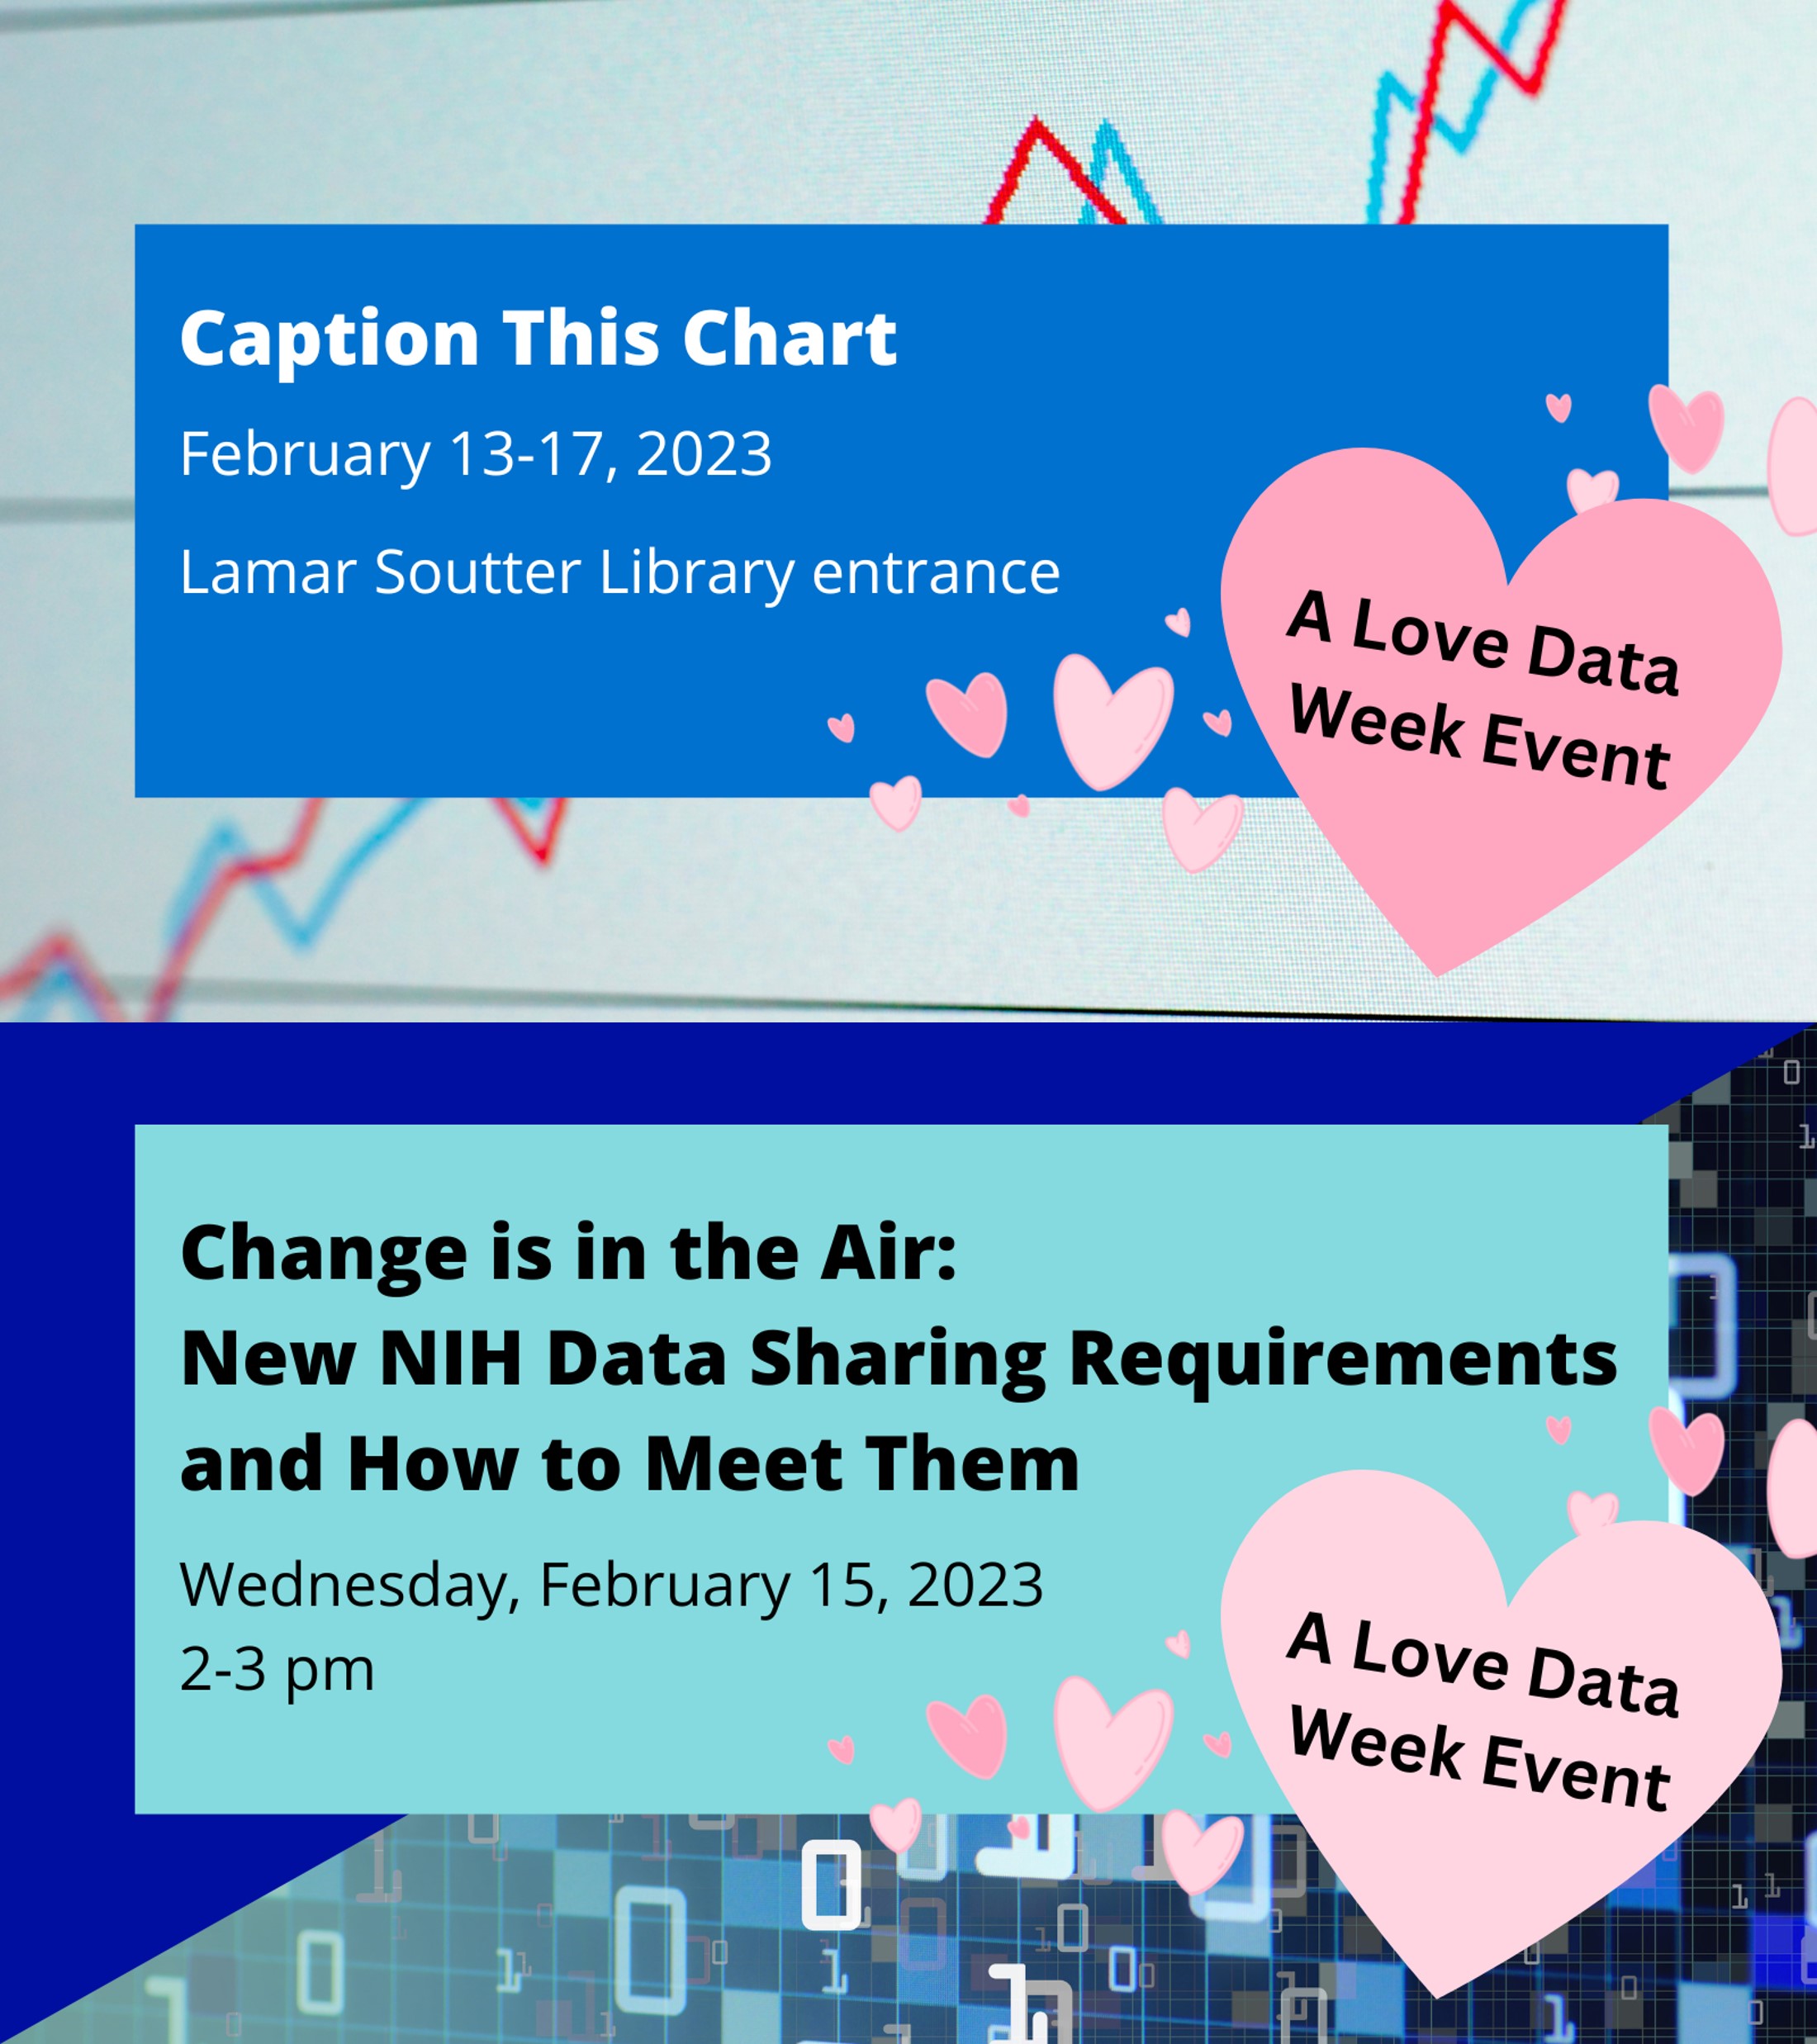 Image for Love Data Week 2023 events